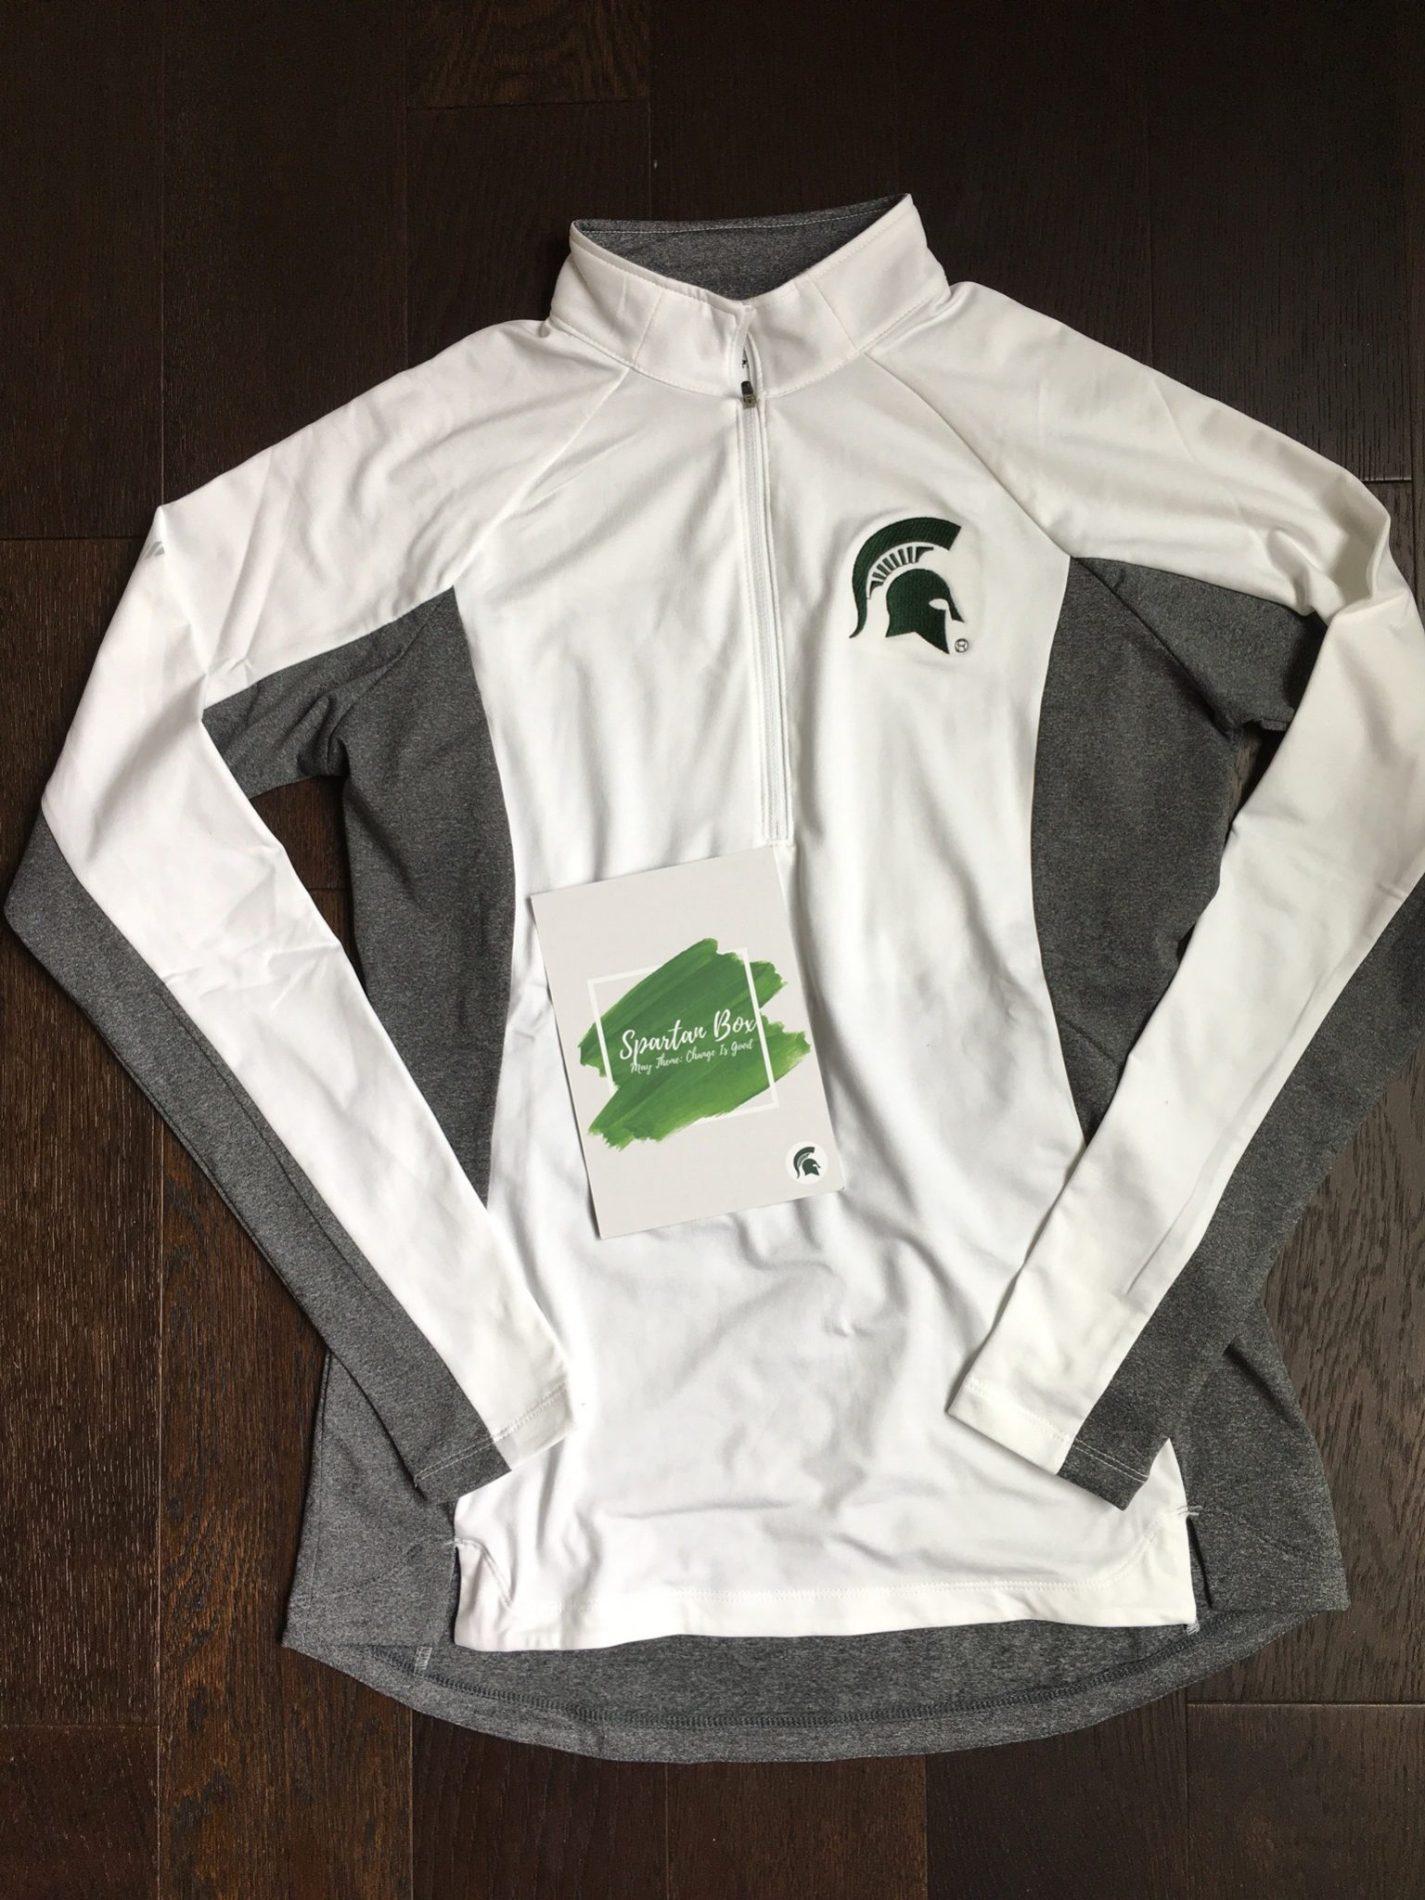 Read more about the article Spartan Box Michigan State Subscription Box Review – May 2018